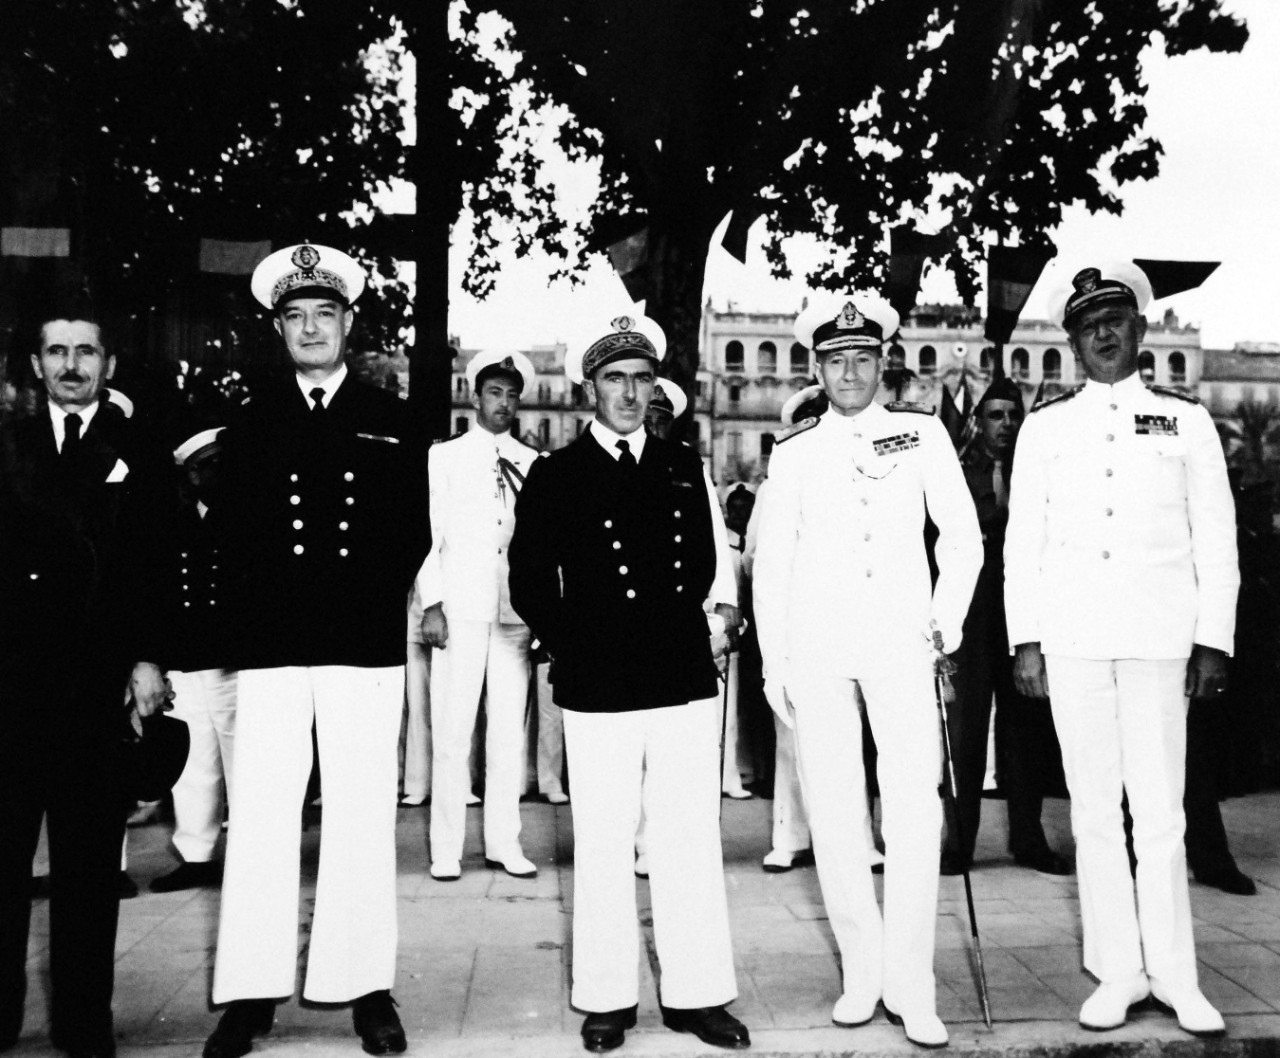 80-G-364100:    Invasion of Southern France, Toulon, August-September 1944.   Allied Naval Commanders of the Mediterranean join in victory celebration at Toulon, France, 14 September 1944.  Shown, left to right:  Rear Admiral Lambert; Rear Admiral Andre Lemonnier, Chief of Staff of French Navy; Admiral Sir John H.B. Cunningham, RN, and Vice Admiral H. Kent Hewitt, USN, Commander, Eighth Fleet.   Taken by crew of USS Catoctin  (AGC 5).    Official U.S. Navy Photograph, now in the collections of the National Arcchives.    (2014/7/10).